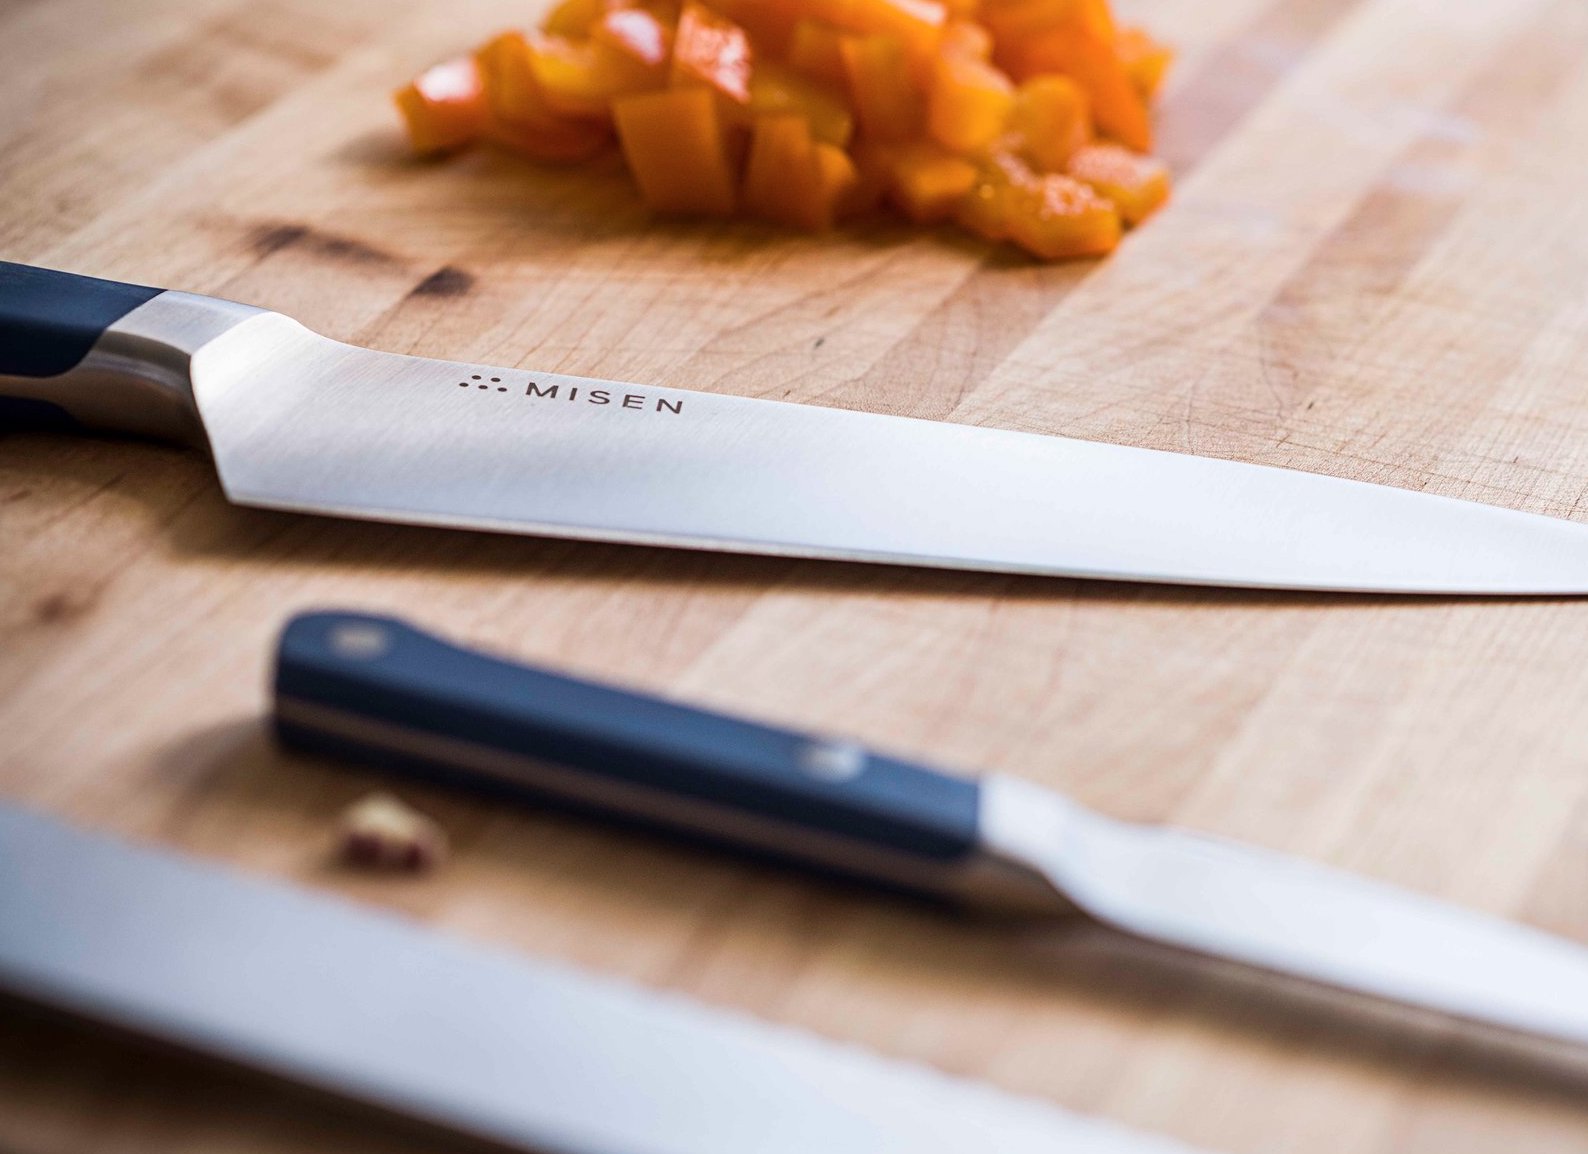 Chef knives: three knives on a cutting board